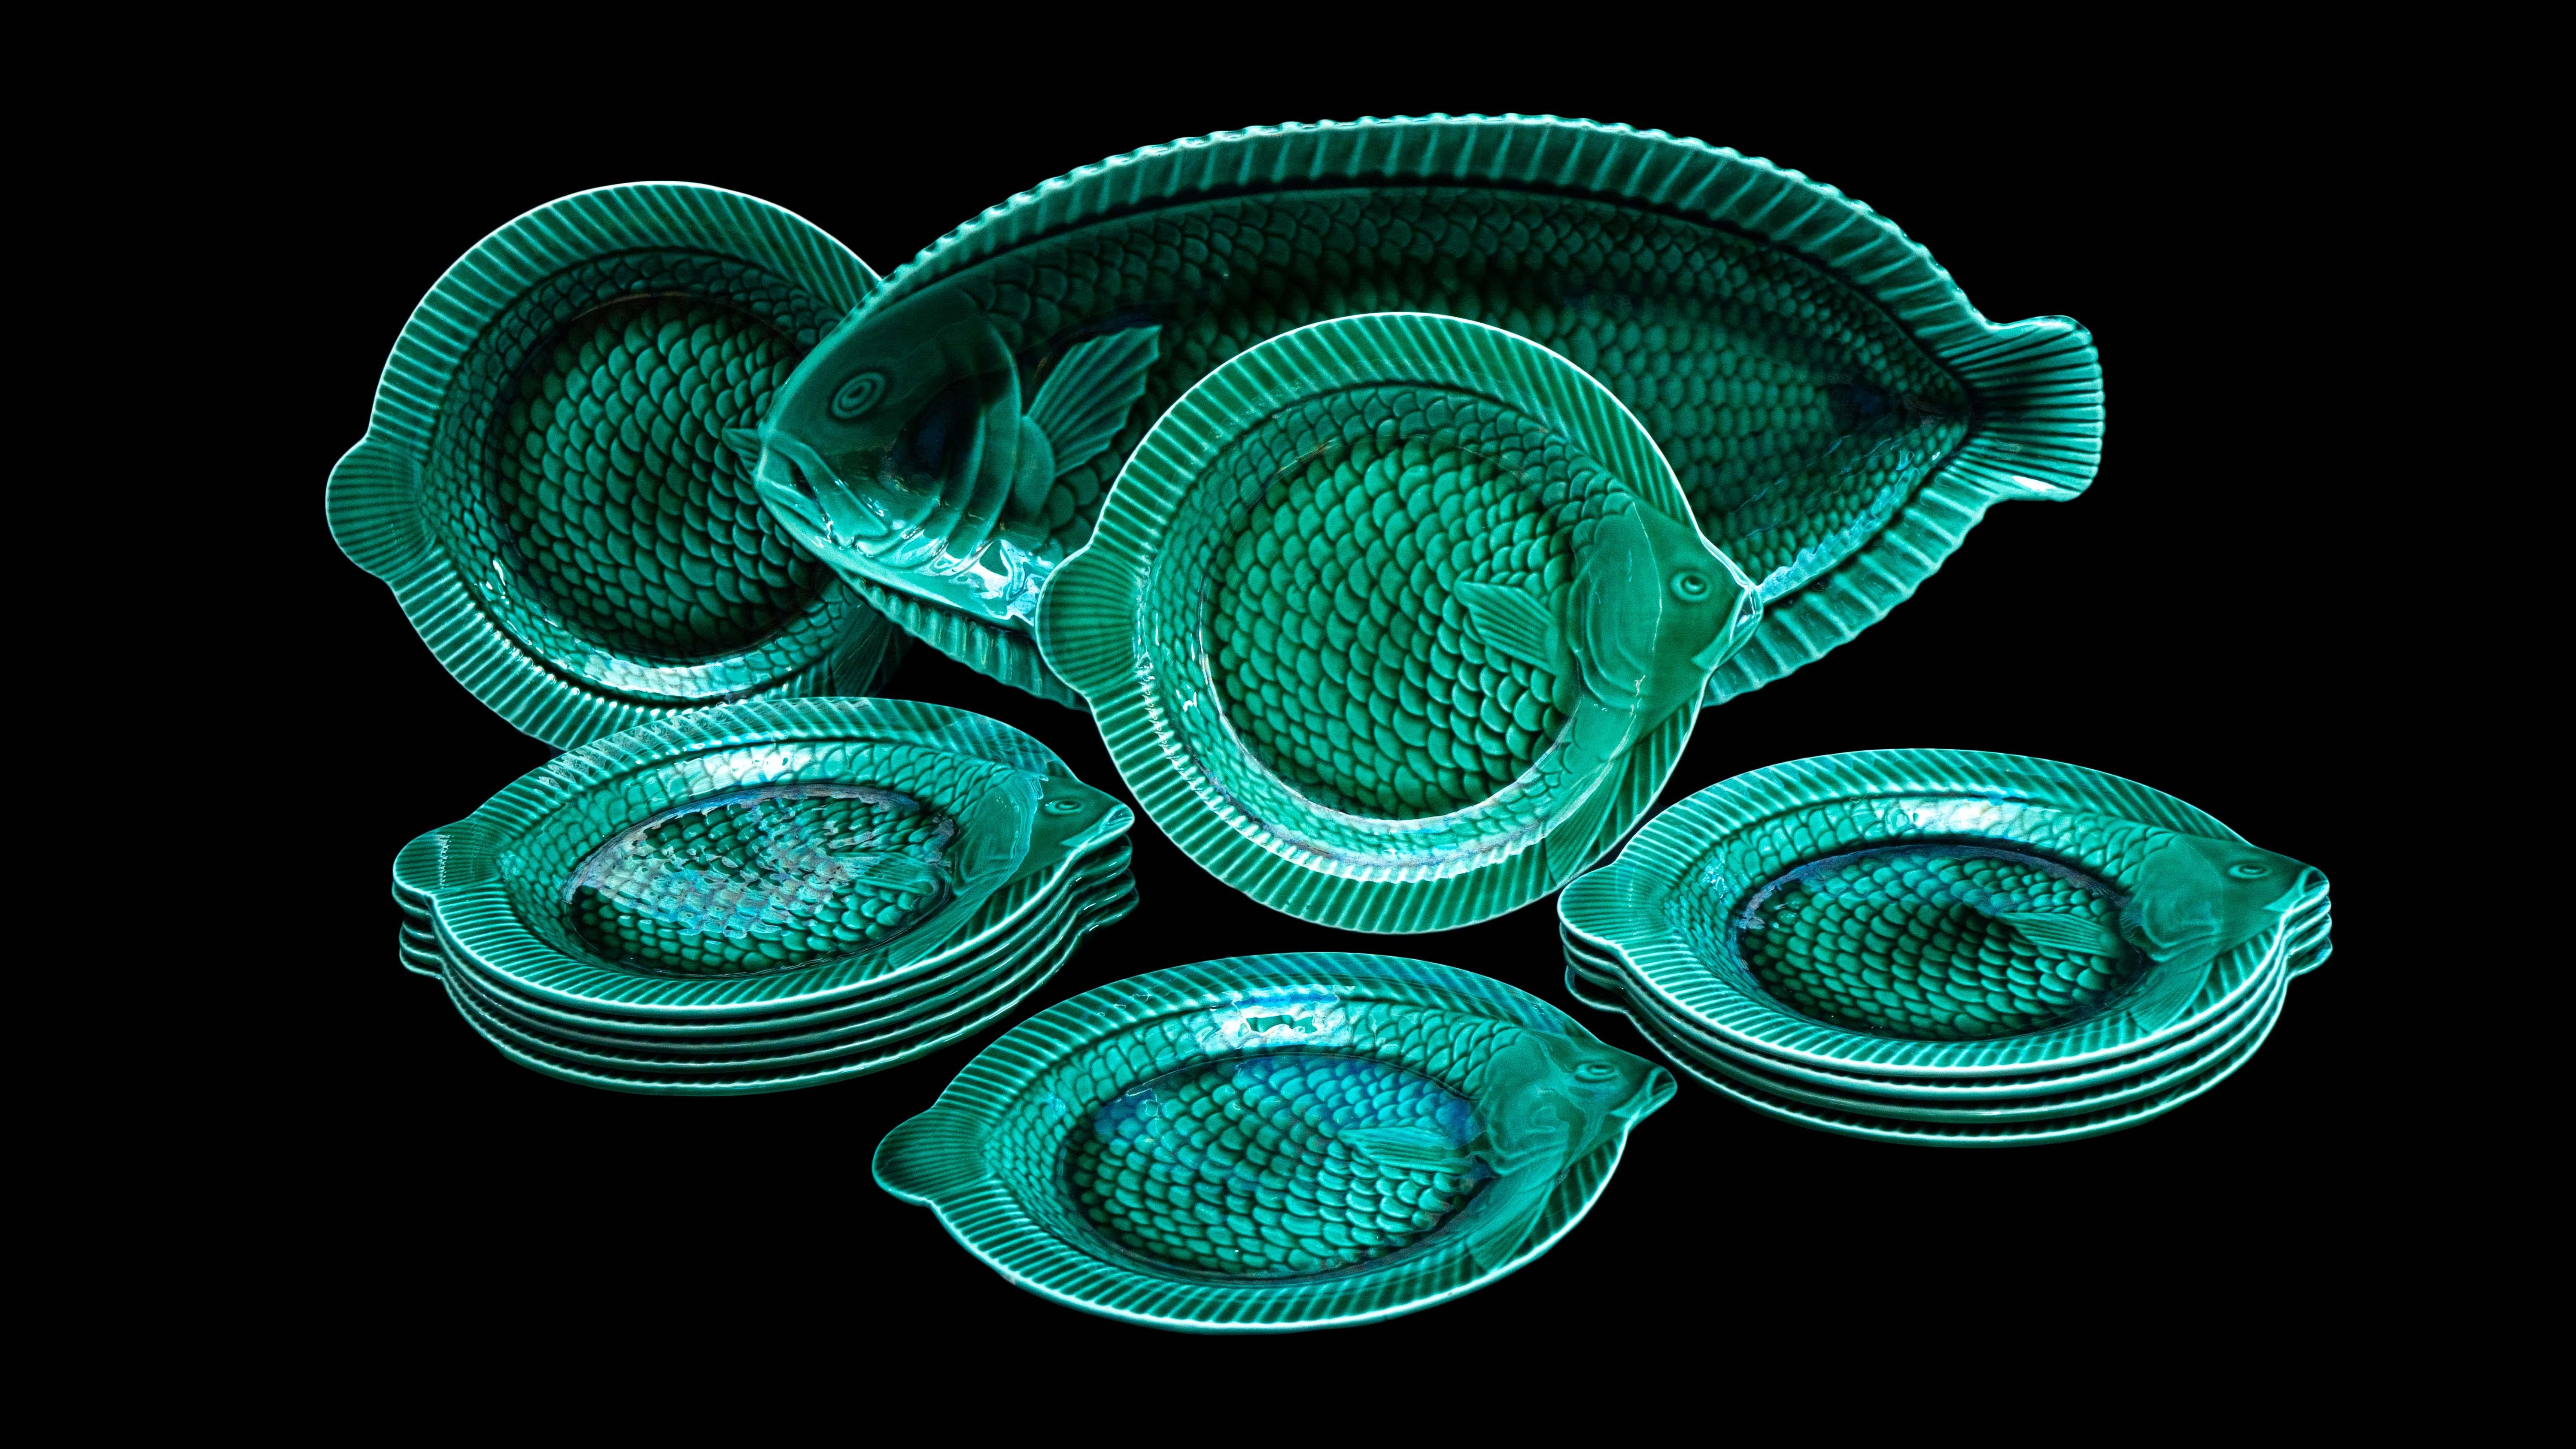 Set of 12 Emerald green fish plates with large serving platter by Sarreguemies. Sarreguemines, french faïence, green majolica glazed fish service of 12 plates and one large serving platter. the round plates have raised rims with protruding fish